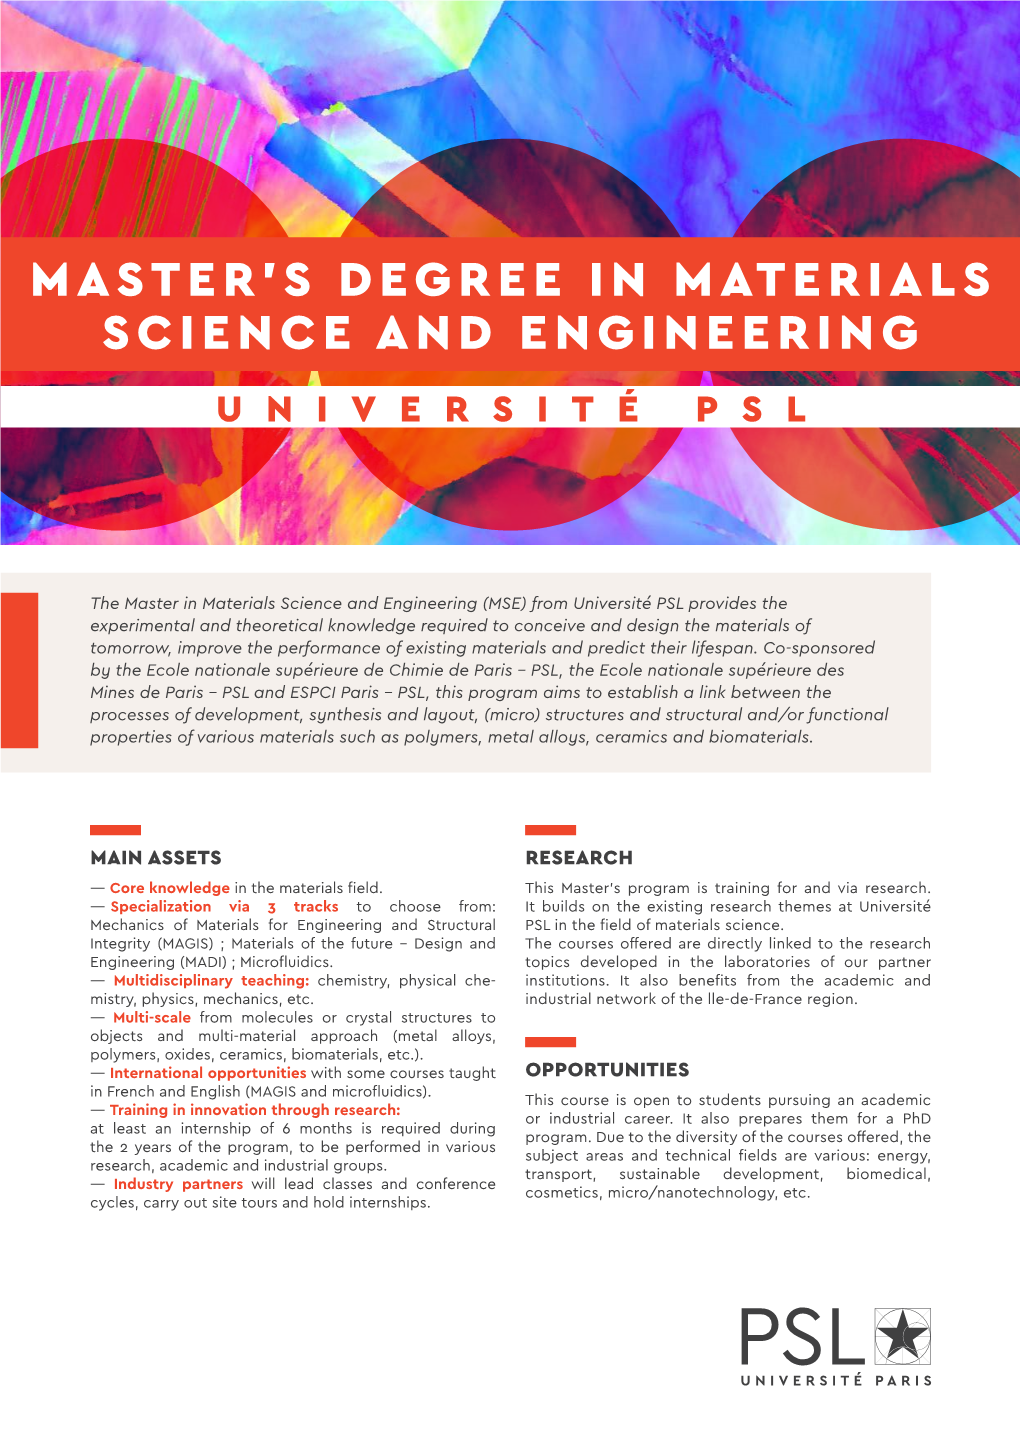 Master's Degree in Materials Science and Engineering